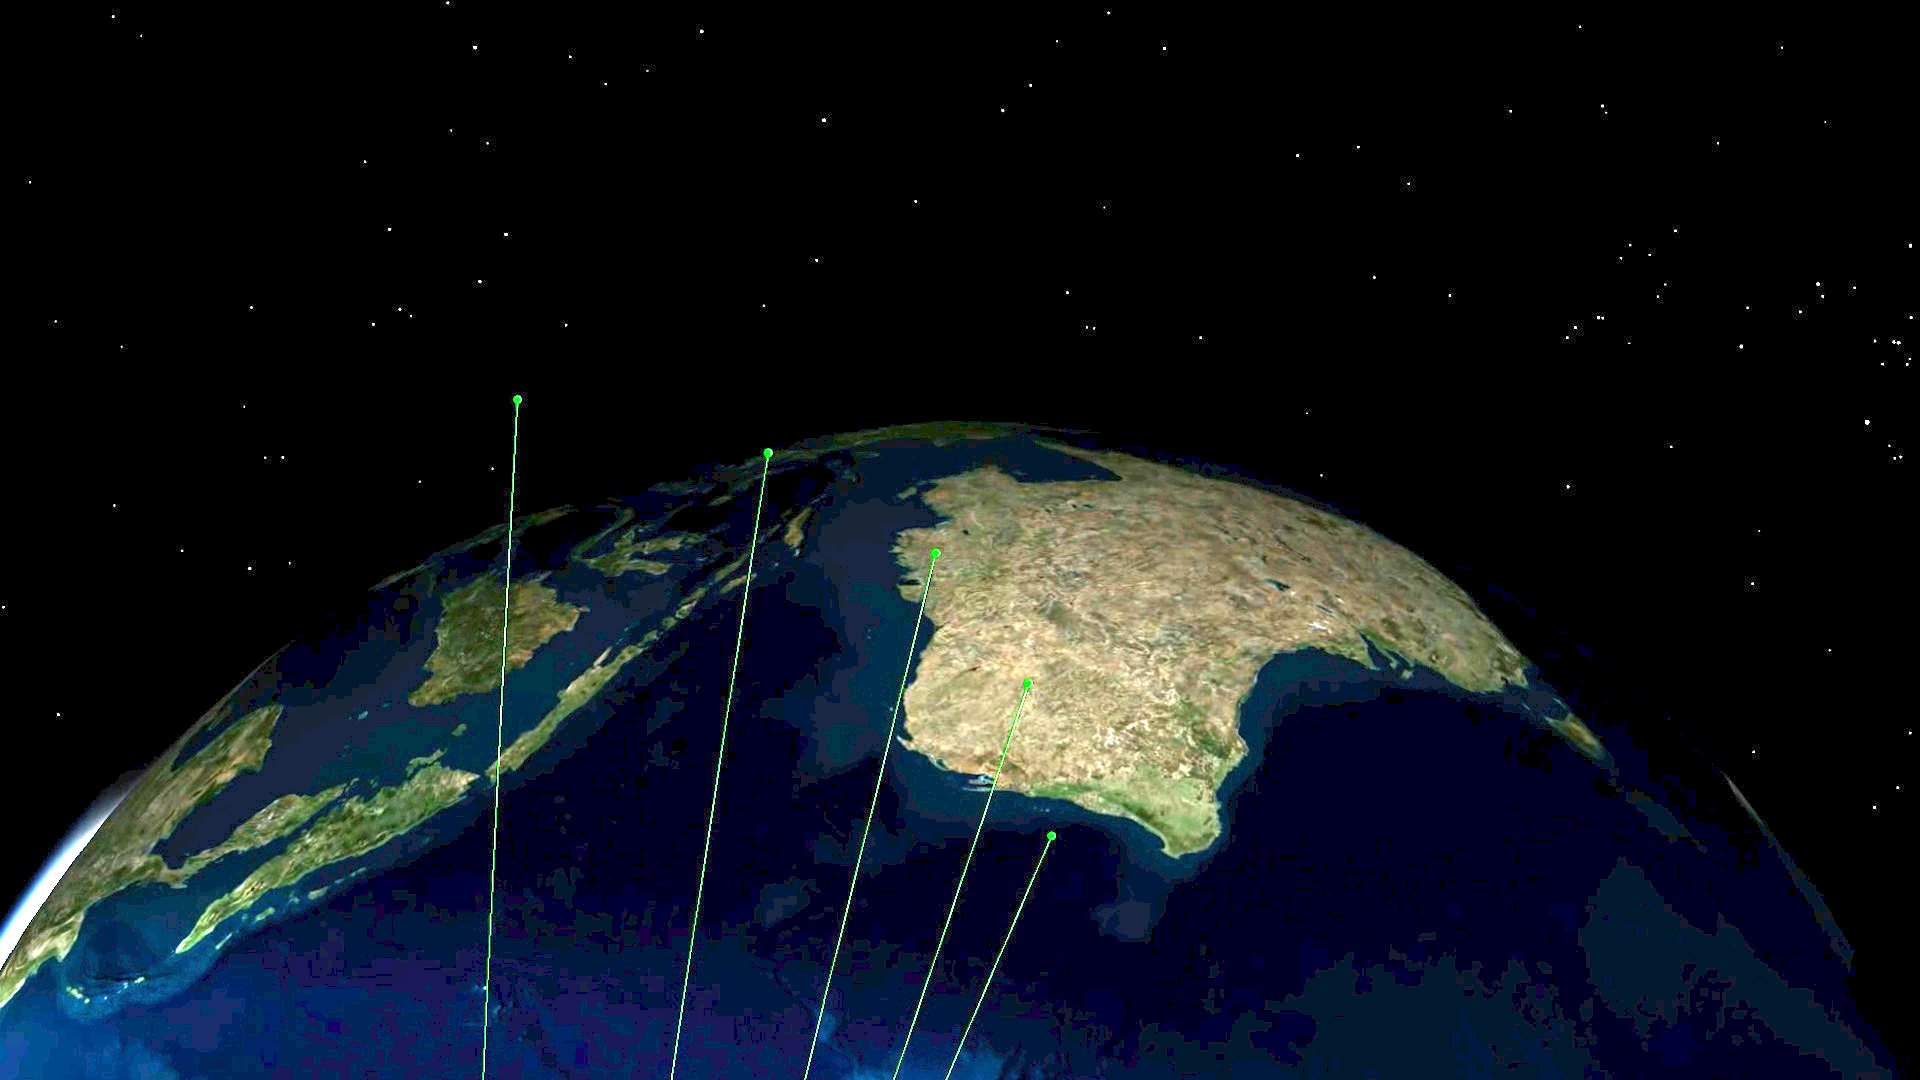 Illustration shows a sample of the Lucy trajectories accounting for RAAN and the Earth's rotation.